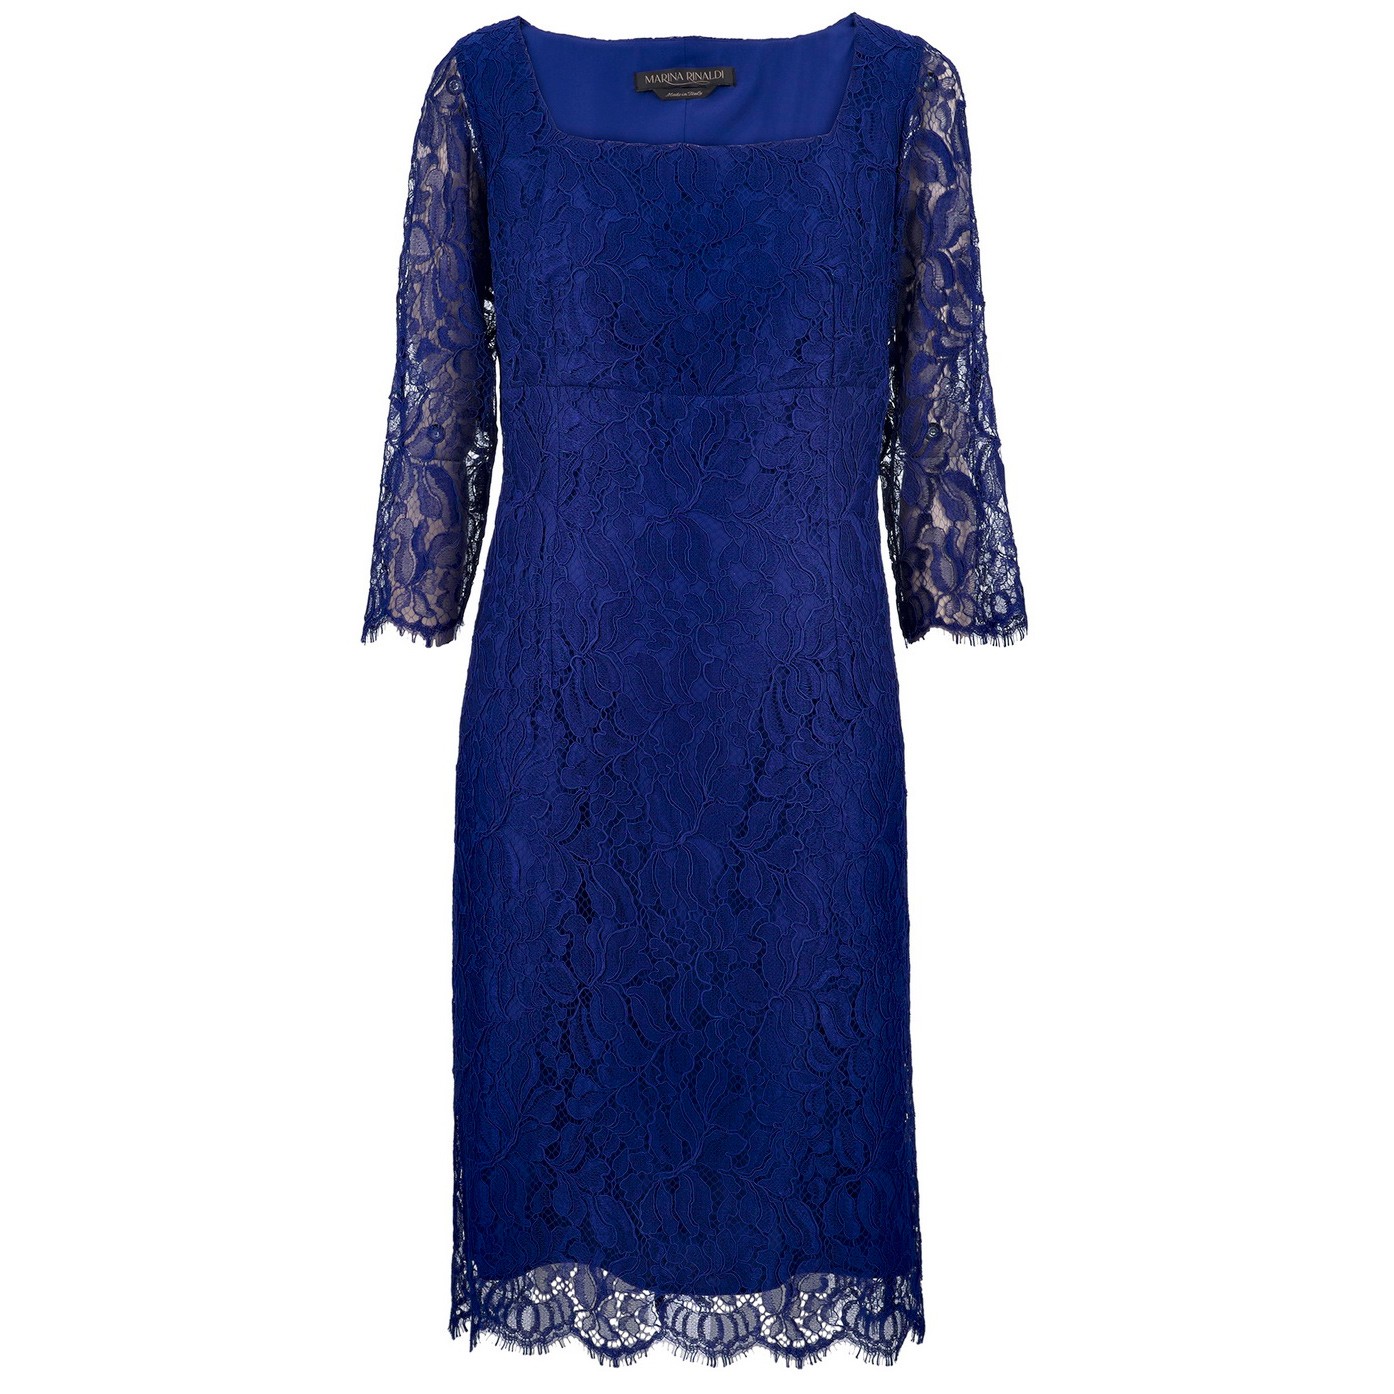 Elegant Royal Blue Lace Mother of the Bride Dresses with Long Sleeves